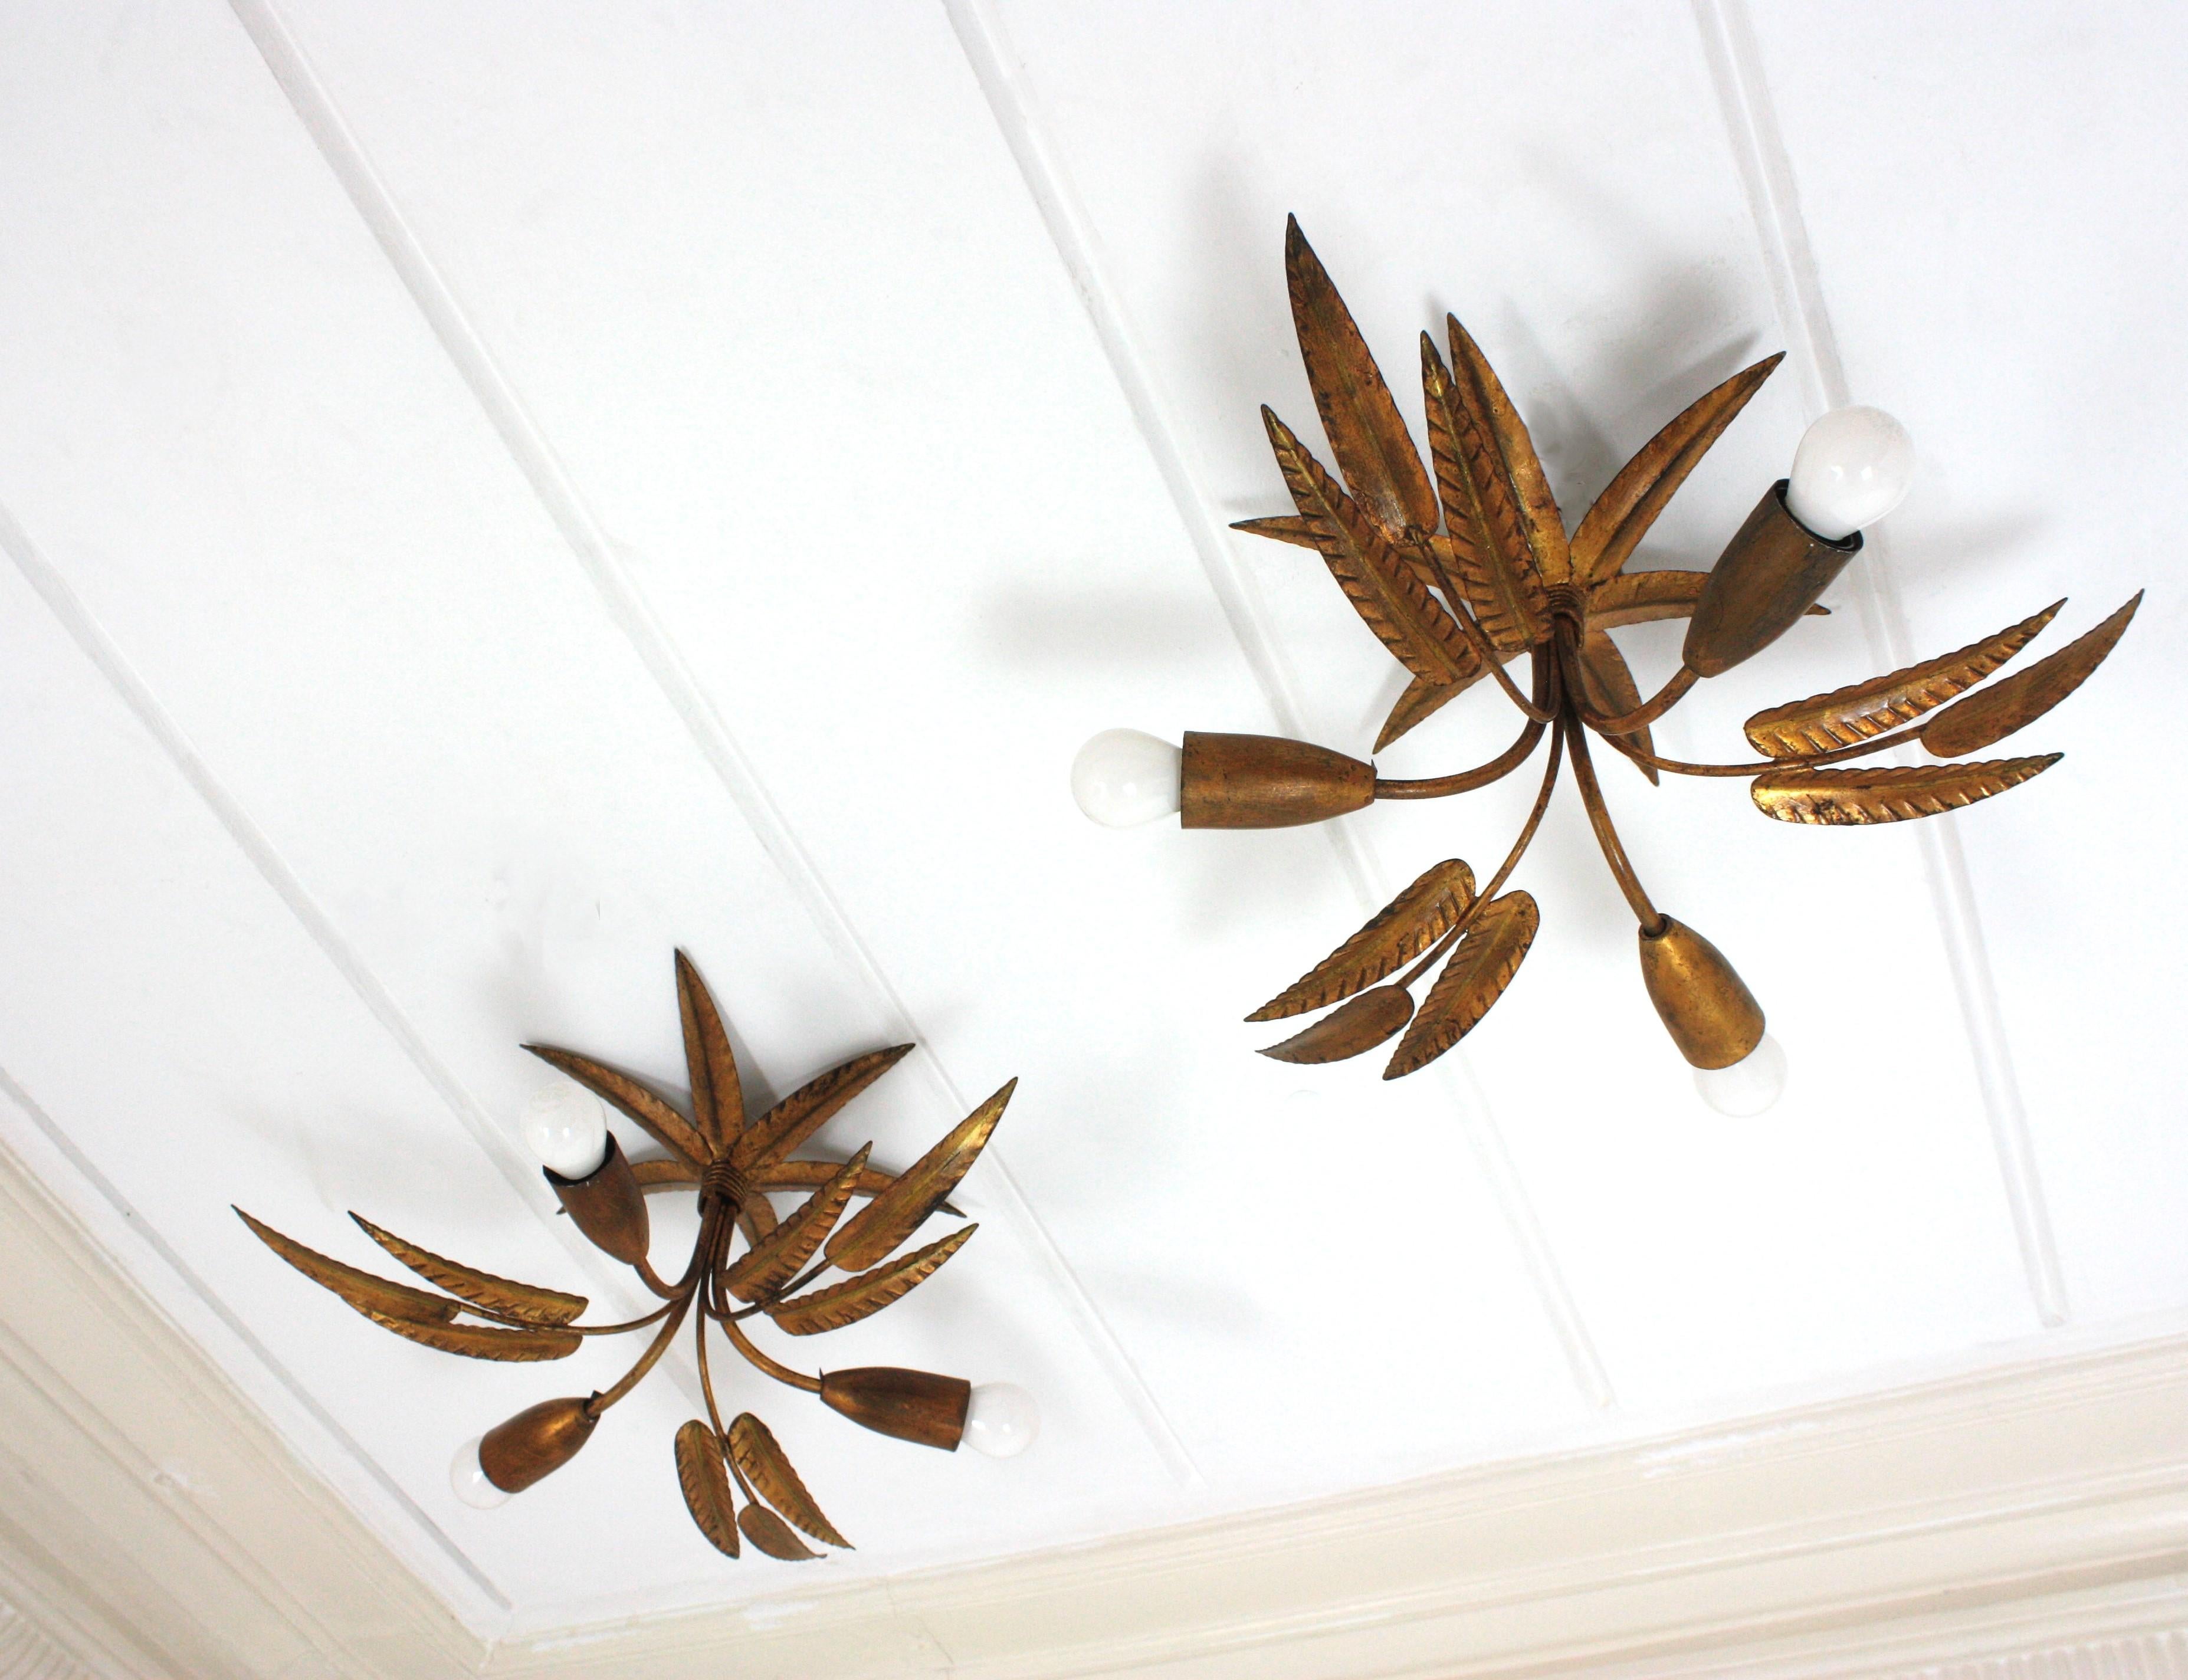 Pair of Palmette Chandeliers or Pendants in Gilt Iron with Leaves Design For Sale 3